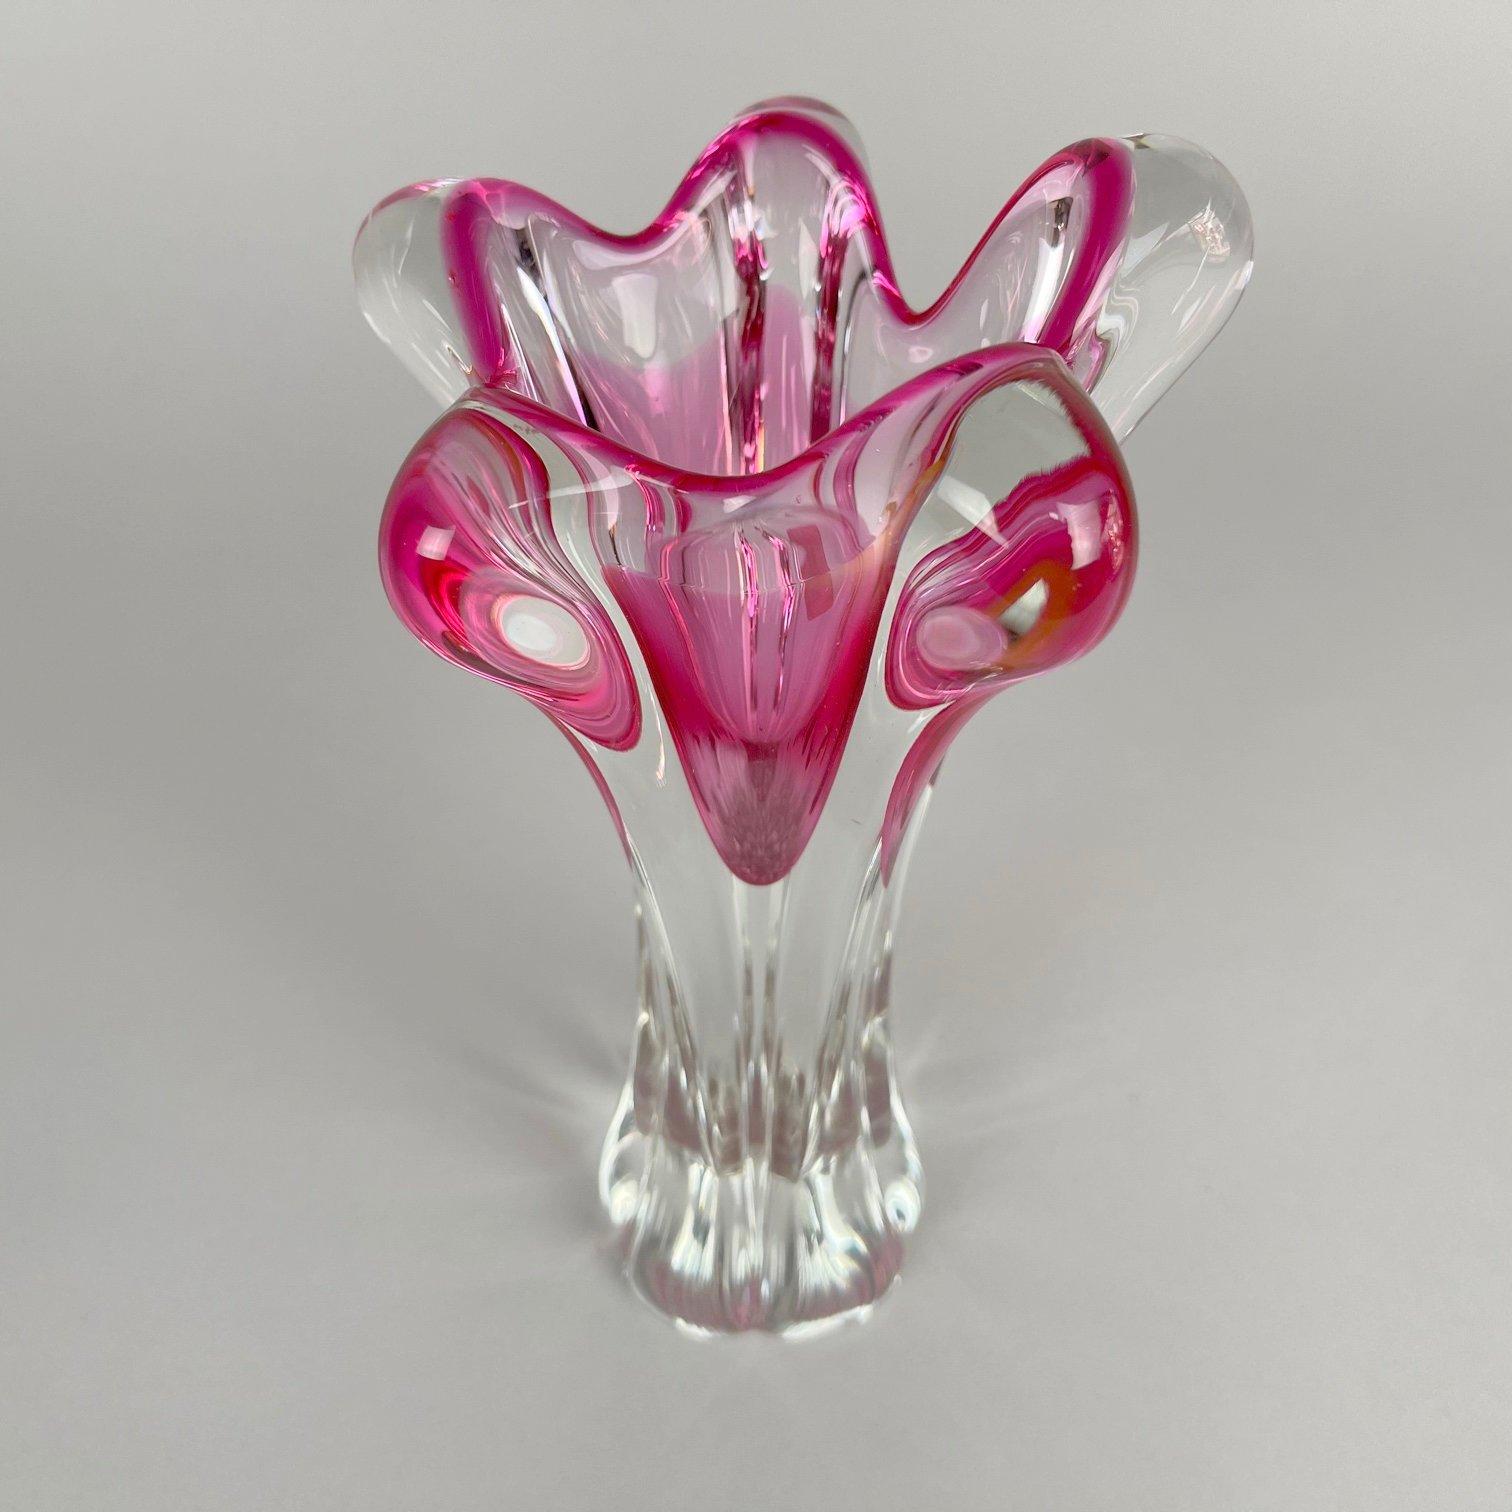 Art glass vase designed by Josef Hospodka in the Czechoslovakia and produced by Chribska Glassworks in th 1960's. The vase has the original label of the Chribská Glassworks.